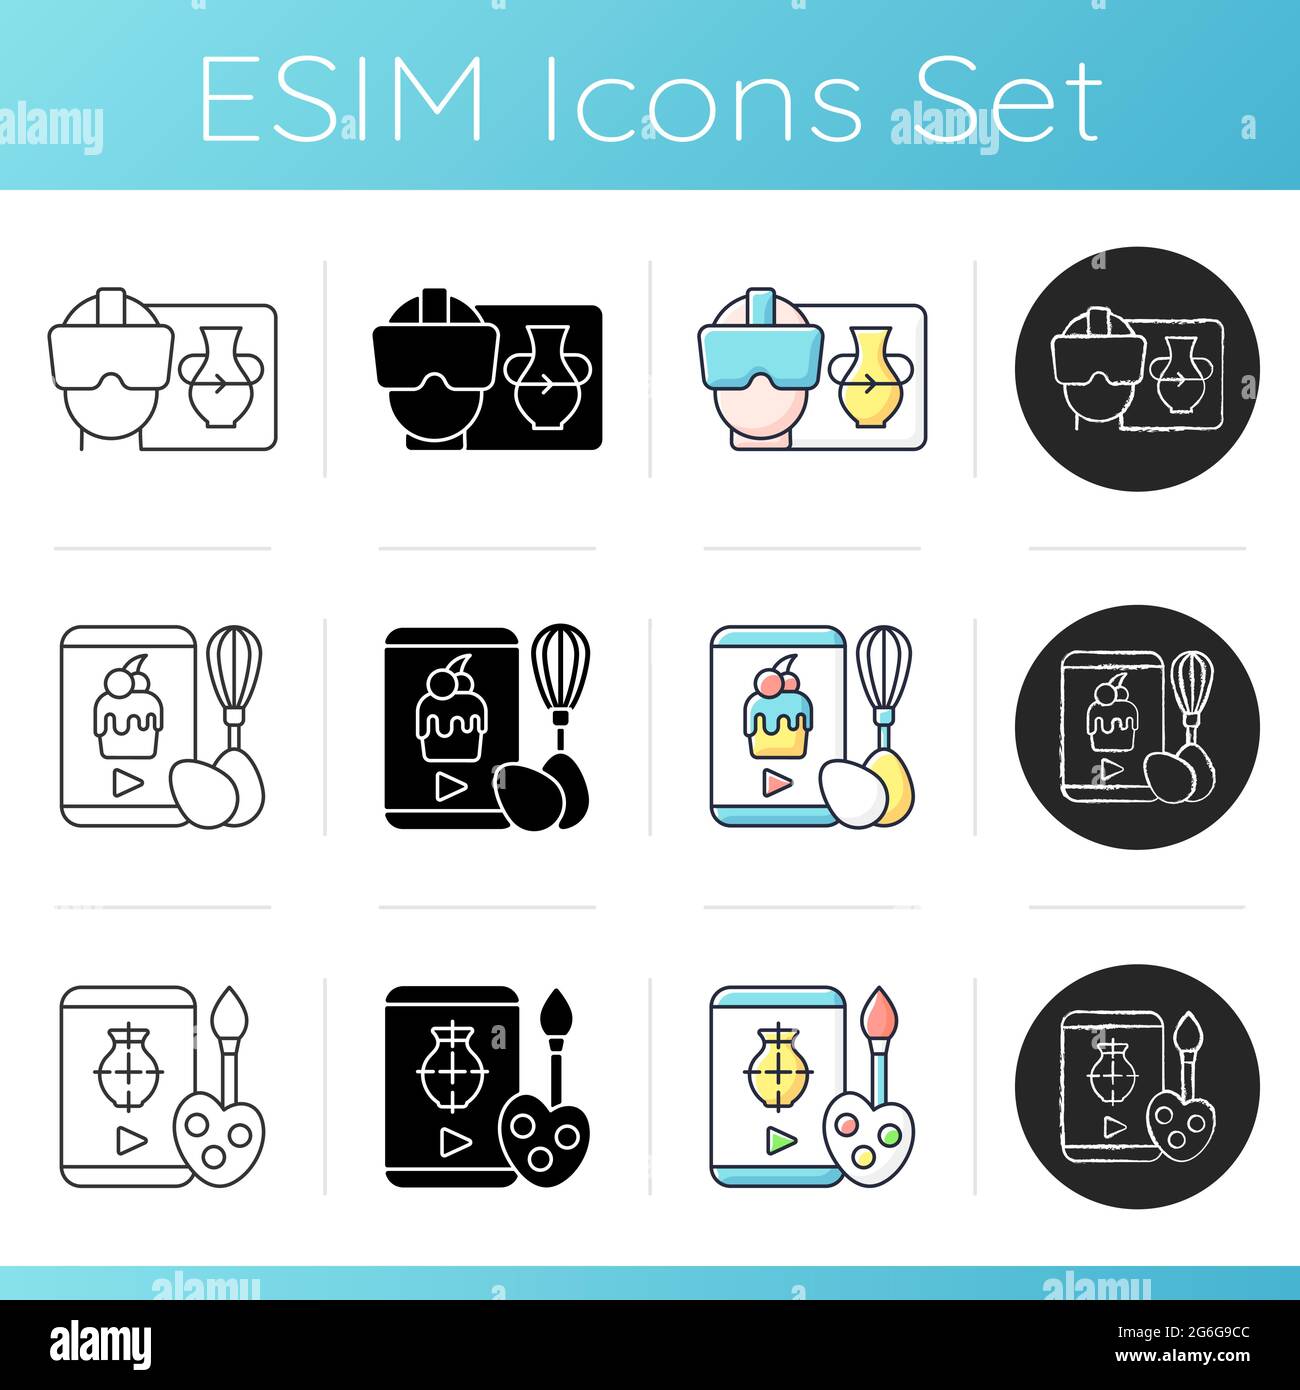 Video content icons set Stock Vector